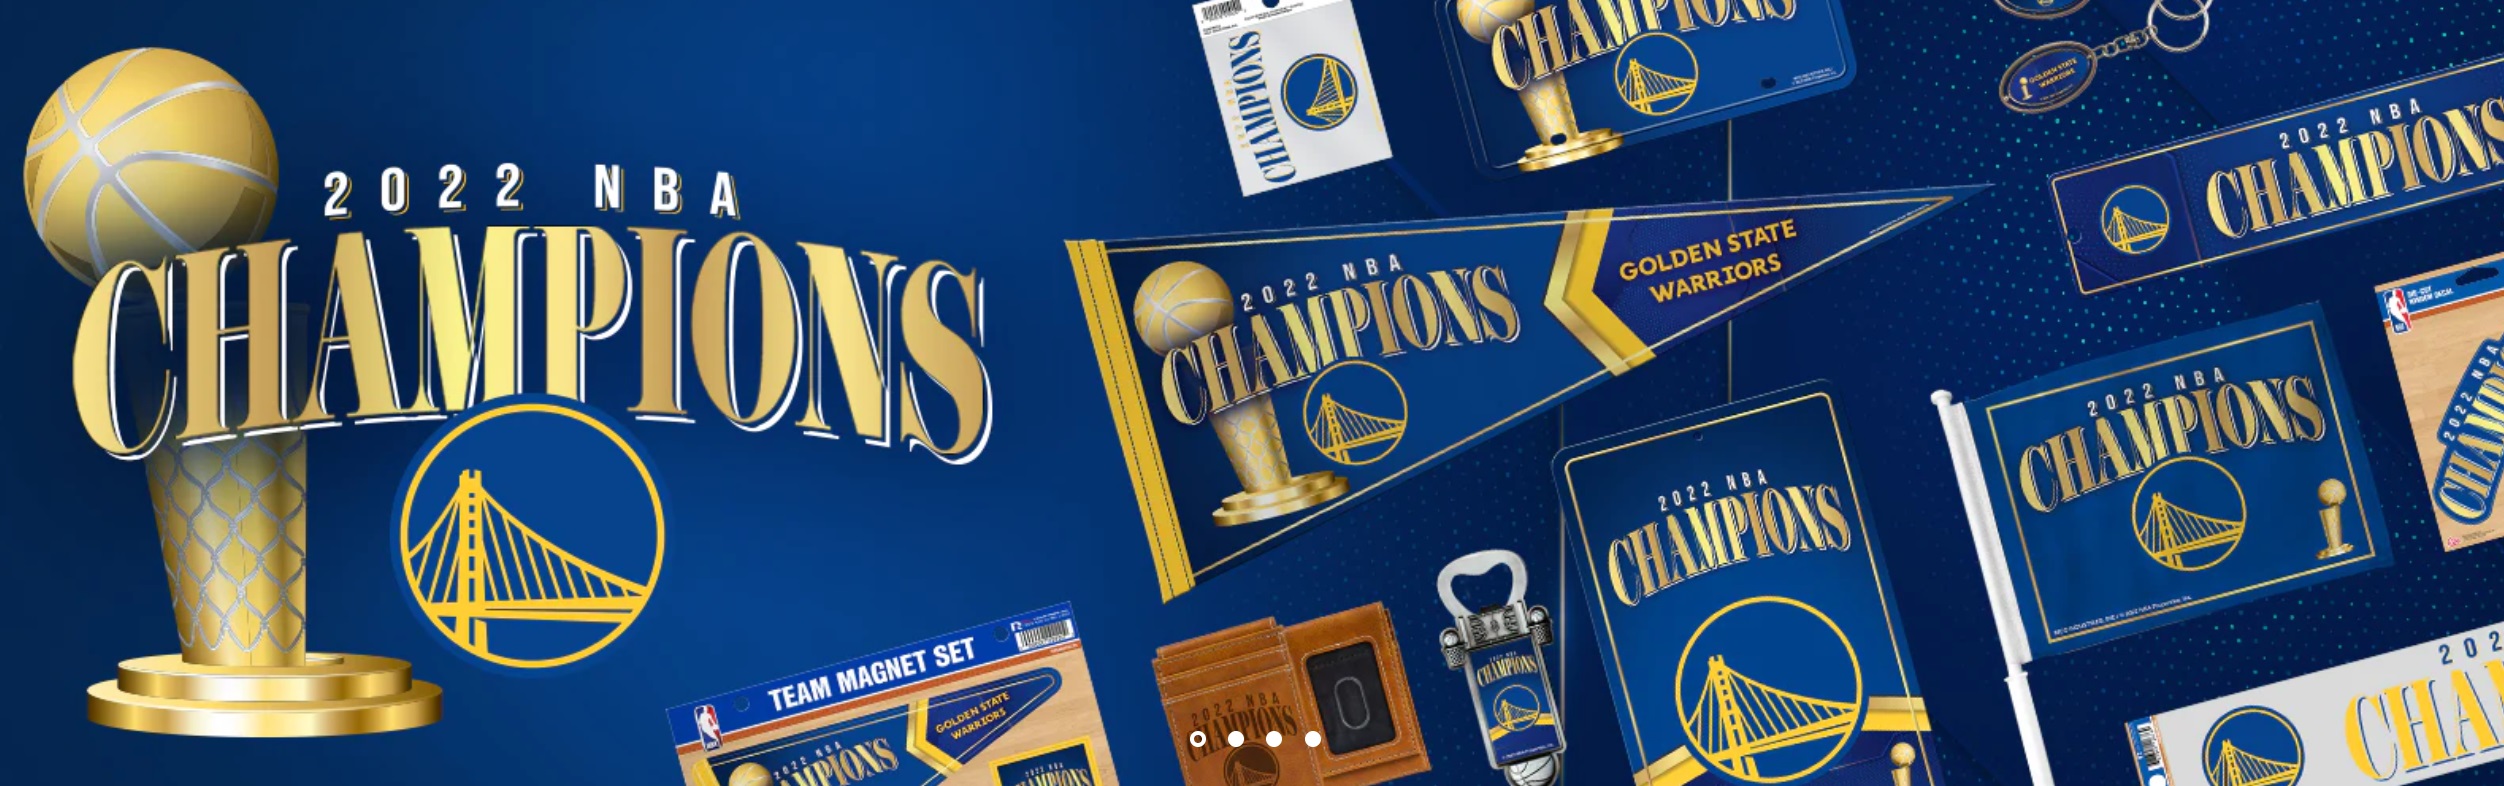  Golden State Warriors 2022 Finals Champions House Banner Flag  : Sports & Outdoors